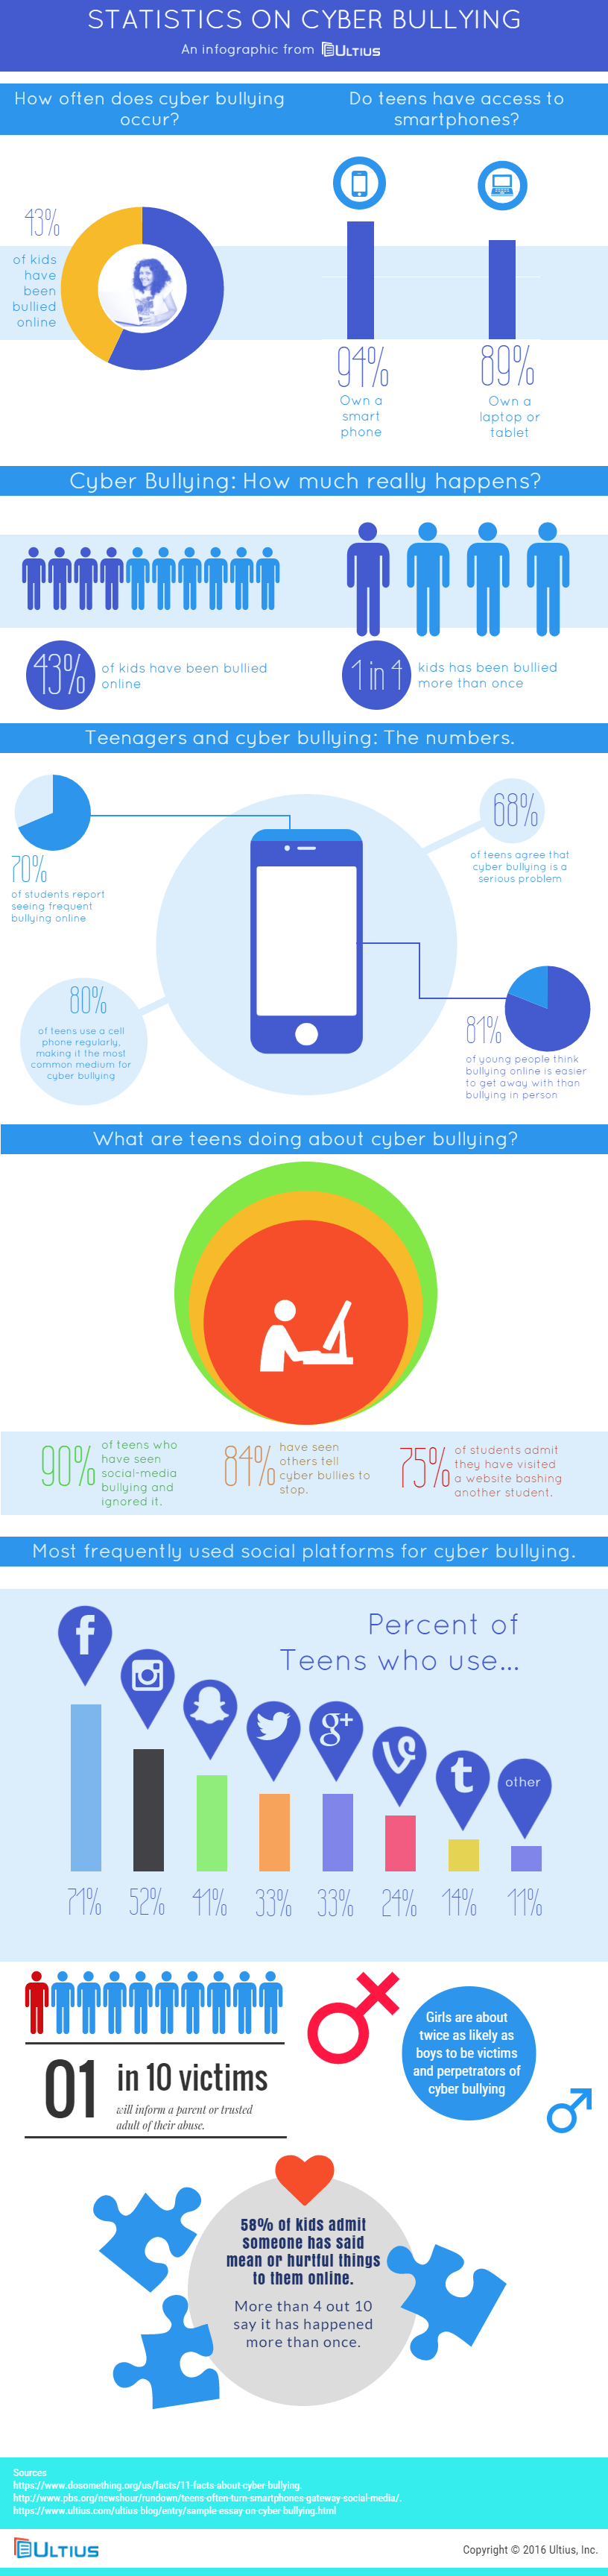 Infographic - Cyber Bullying Statistics